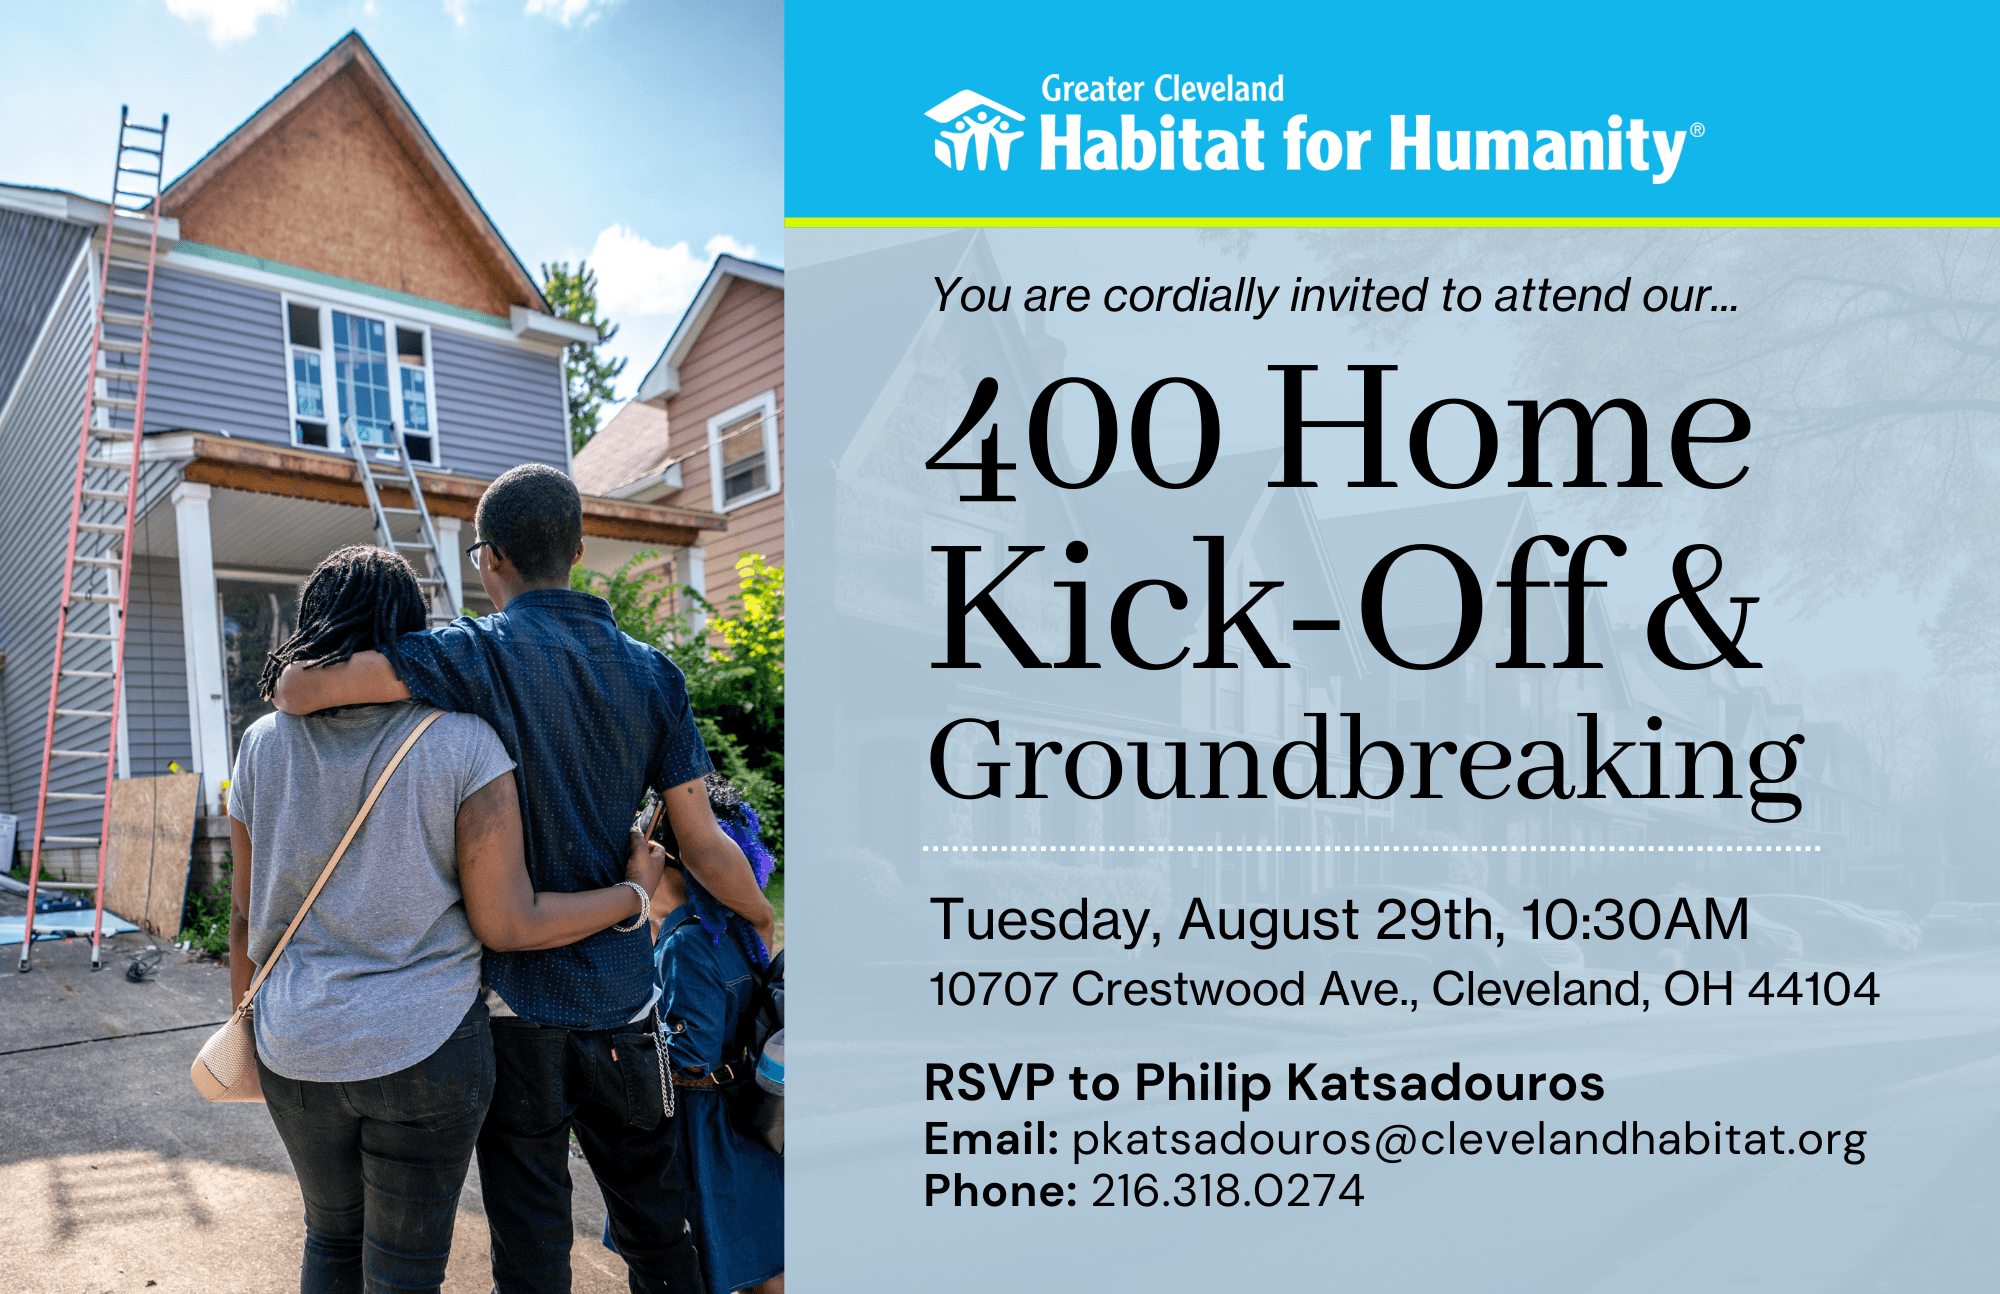 Greater Cleveland Habitat for Humanity will break ground on its 400 Home Strategic Initiative on Tues., Aug. 29th, at 10:30 a.m. at 10707 Crestwood Ave. in Cleveland. 